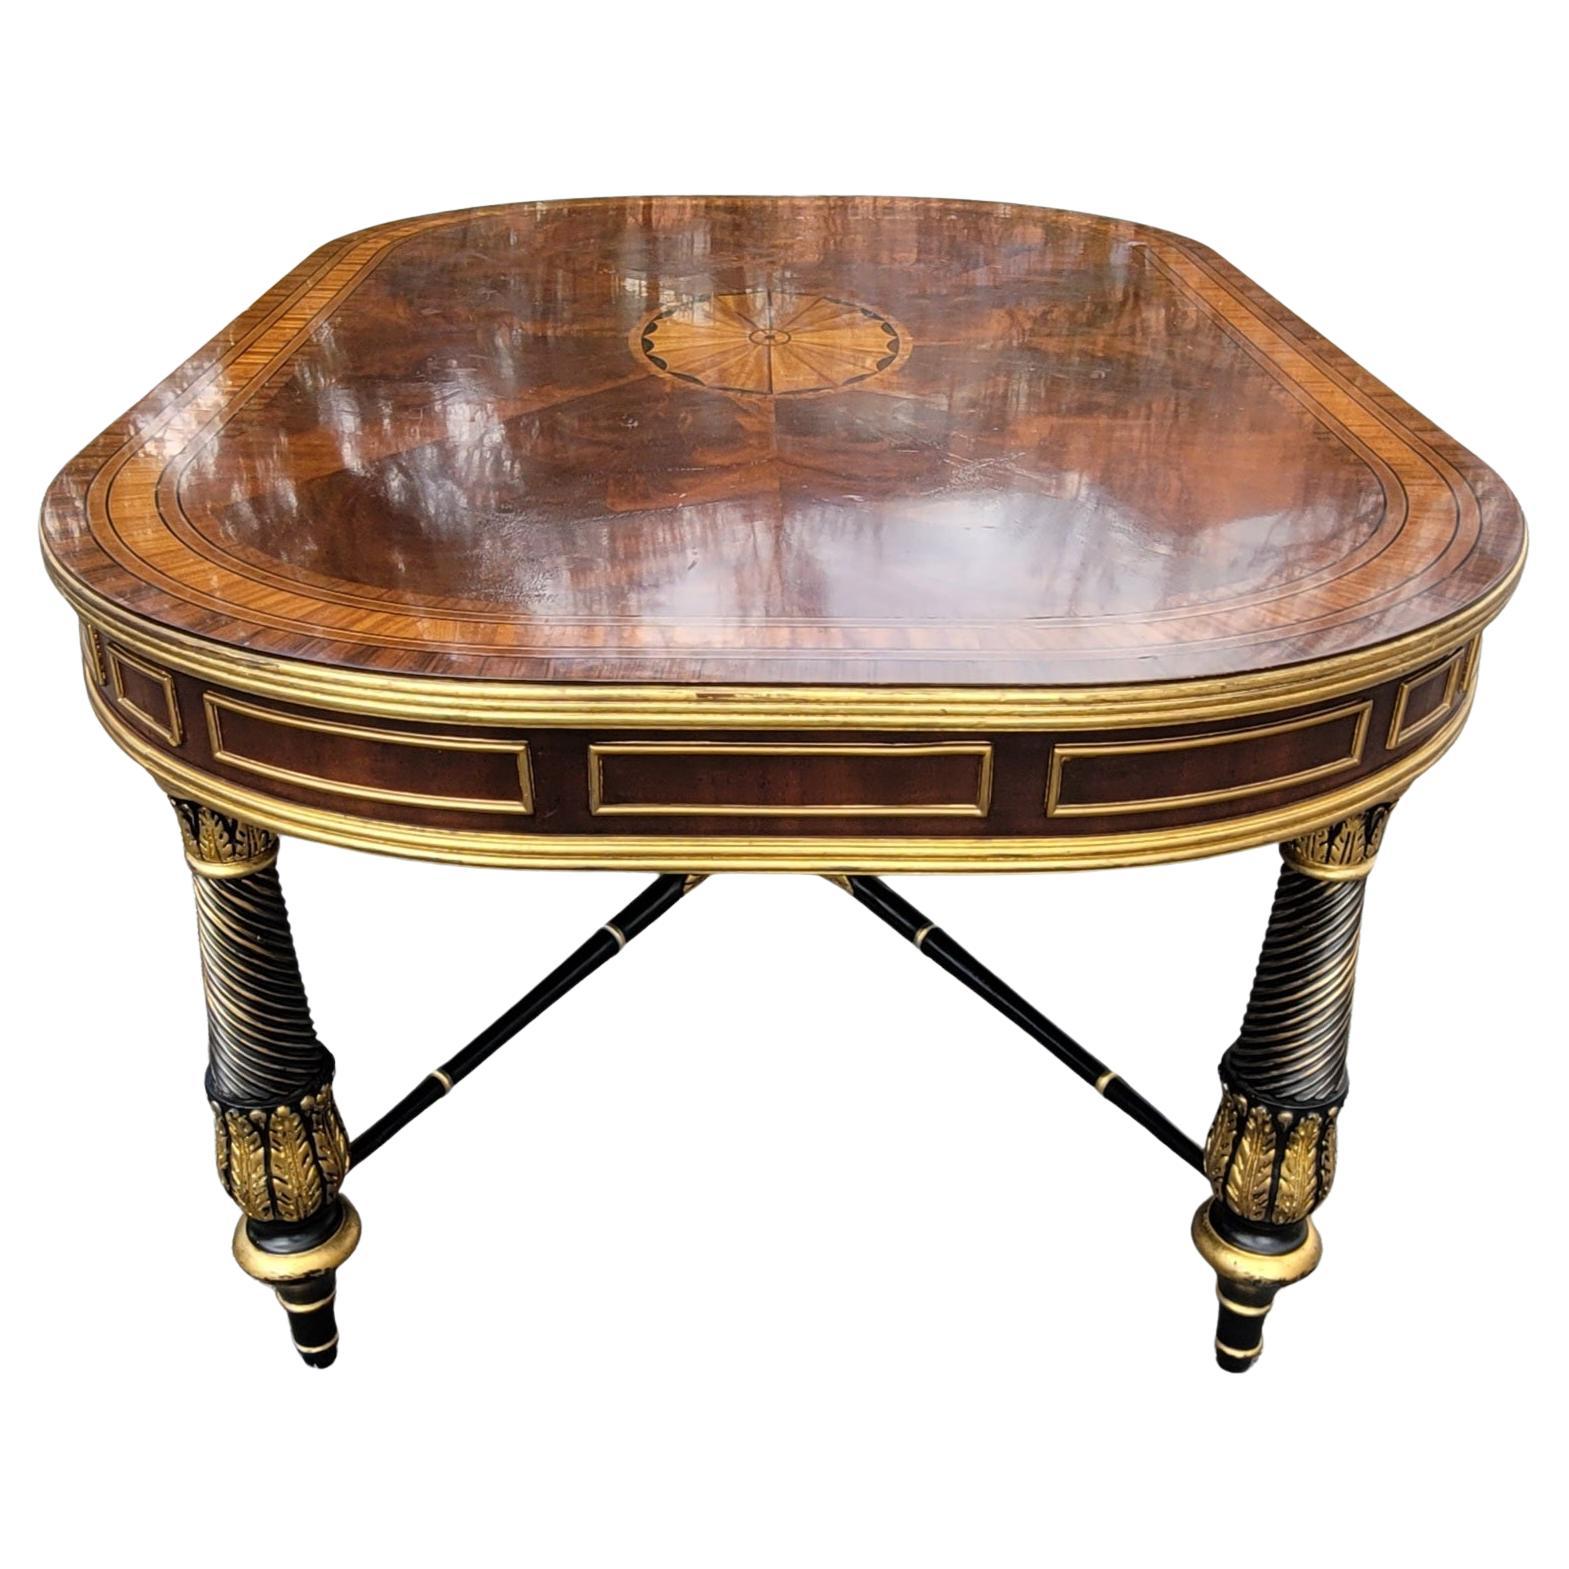 E.J Victor Regency Style Ebonized and Parcel Gilt Marquetry Inlaid Coffee Table 2